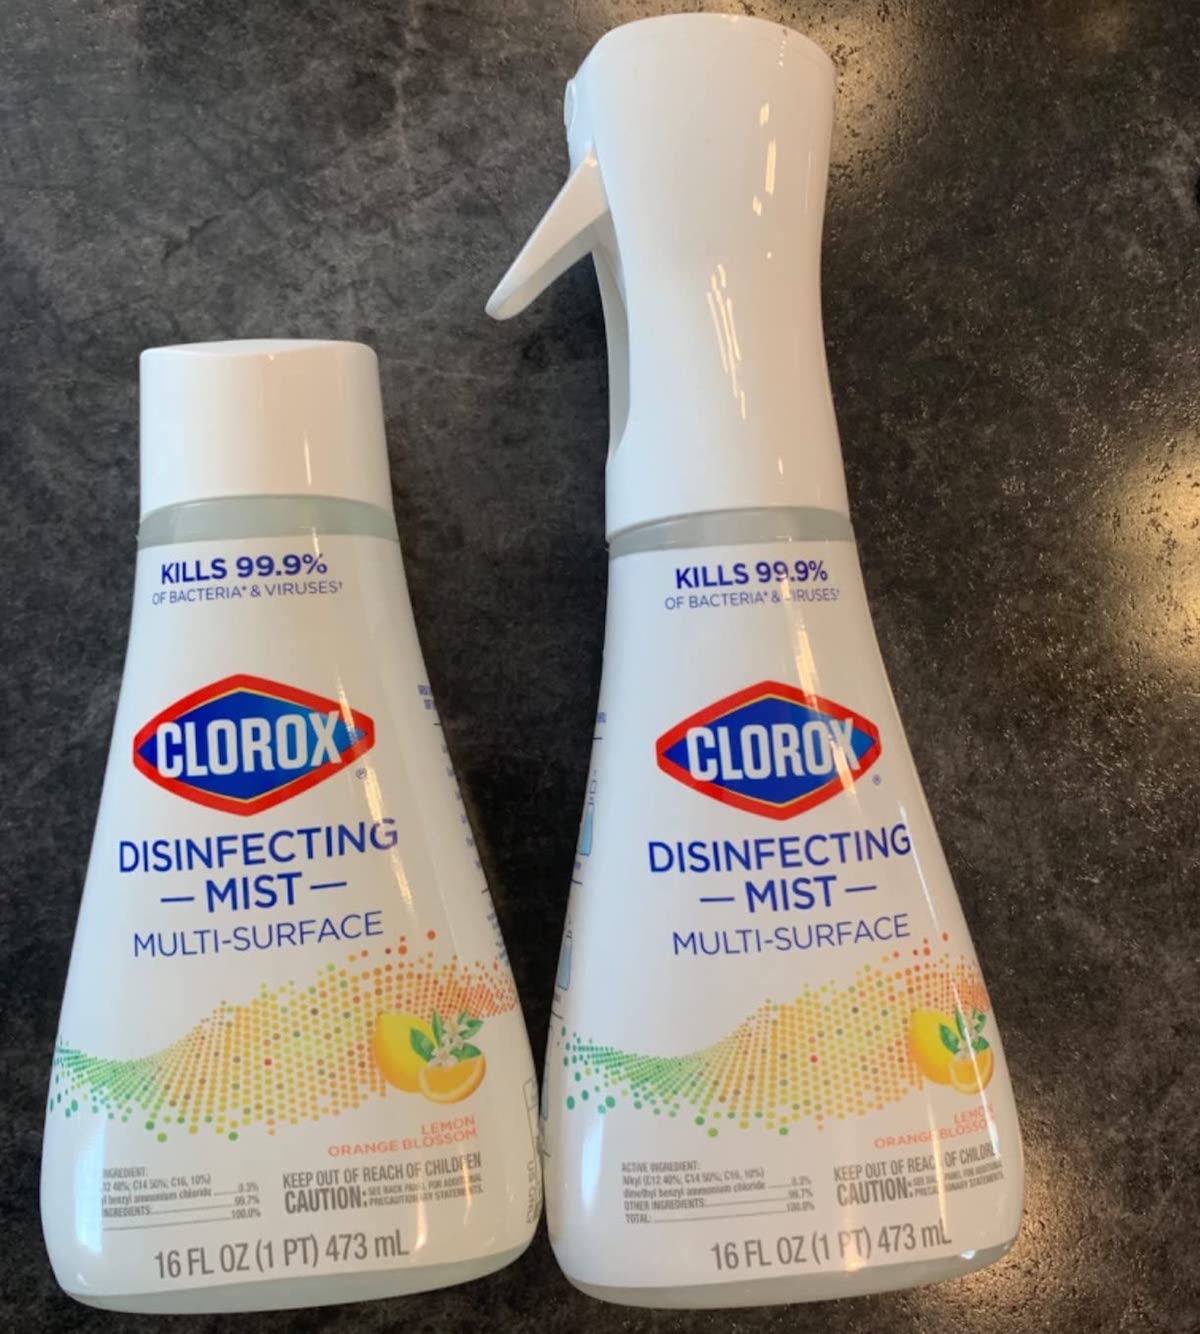 Clorox Disinfecting Mist spray and Refill bottle laying on a granite countertop